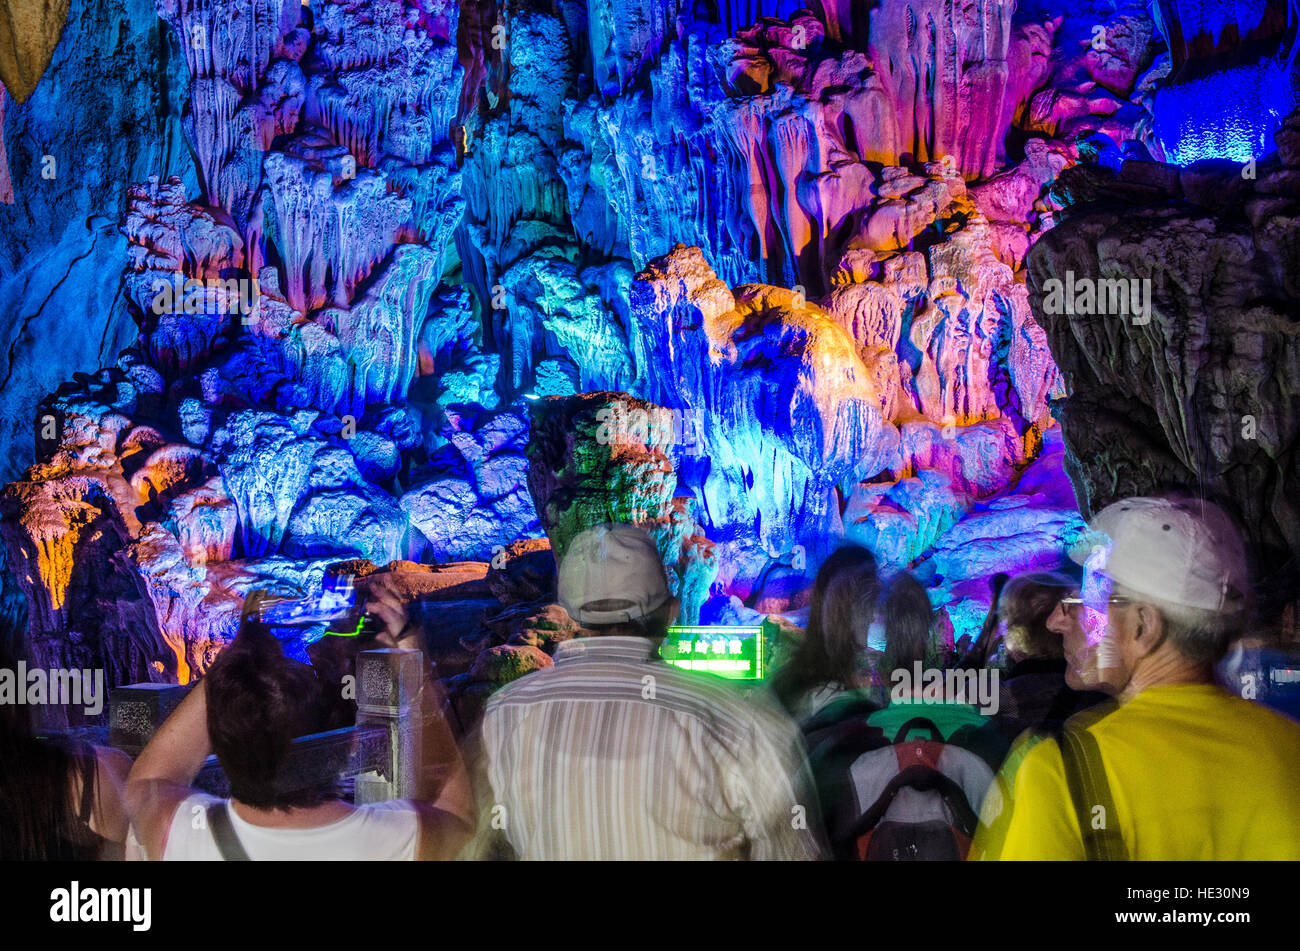 People viewing stalagmites and stalactites in Reed Flute Cave Guilin, China. Stock Photo